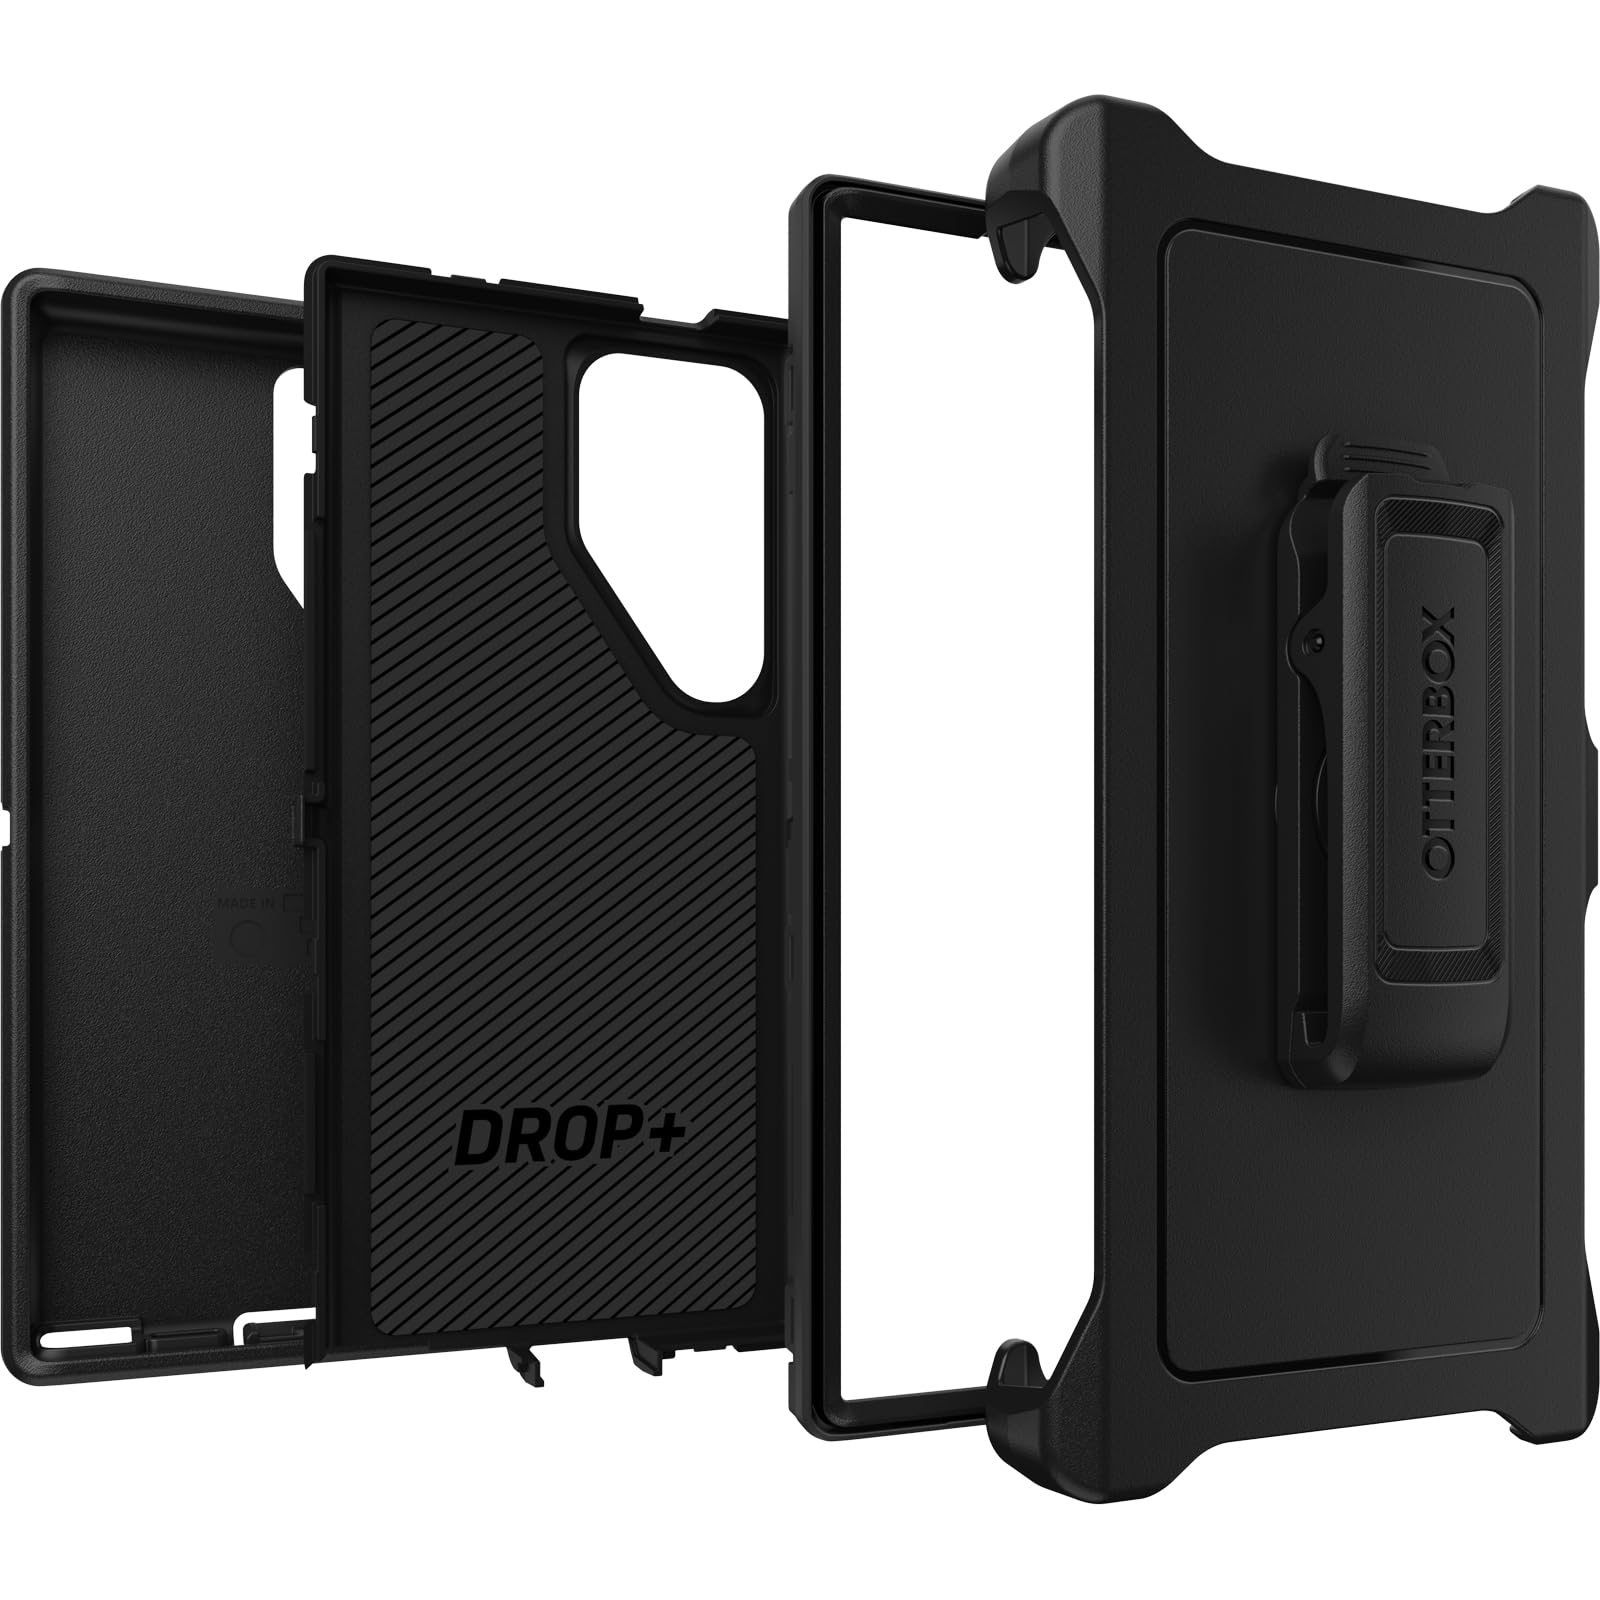 OtterBox Samsung Galaxy S24 Ultra Defender Series Case - Black, Rugged & Durable, with Port Protection, Includes Holster Clip Kickstand